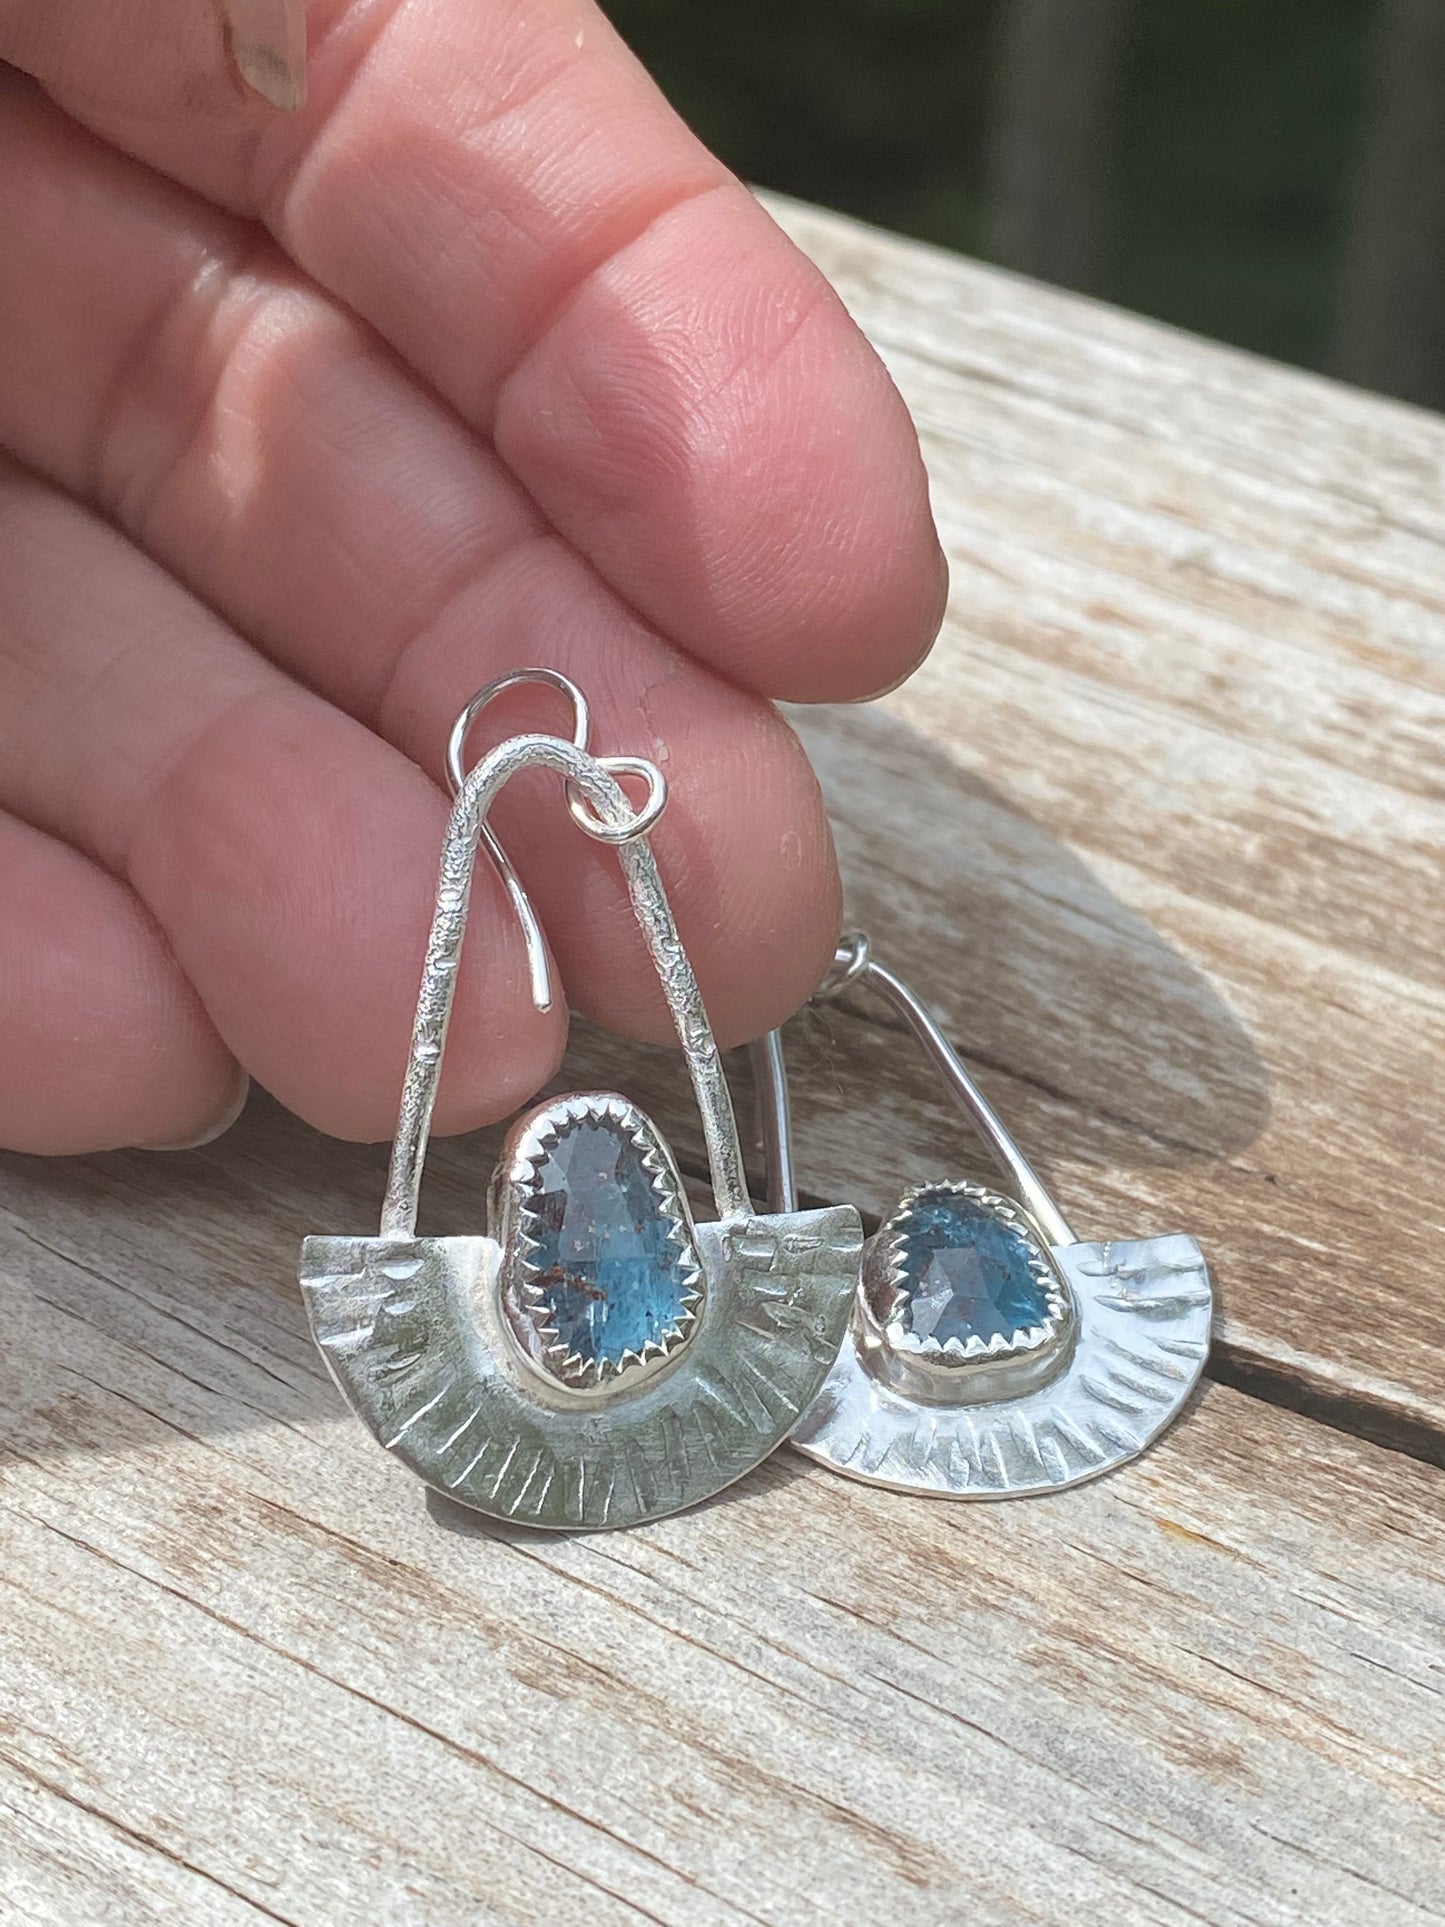 Kyanite earrings - collectionsbytracy.com